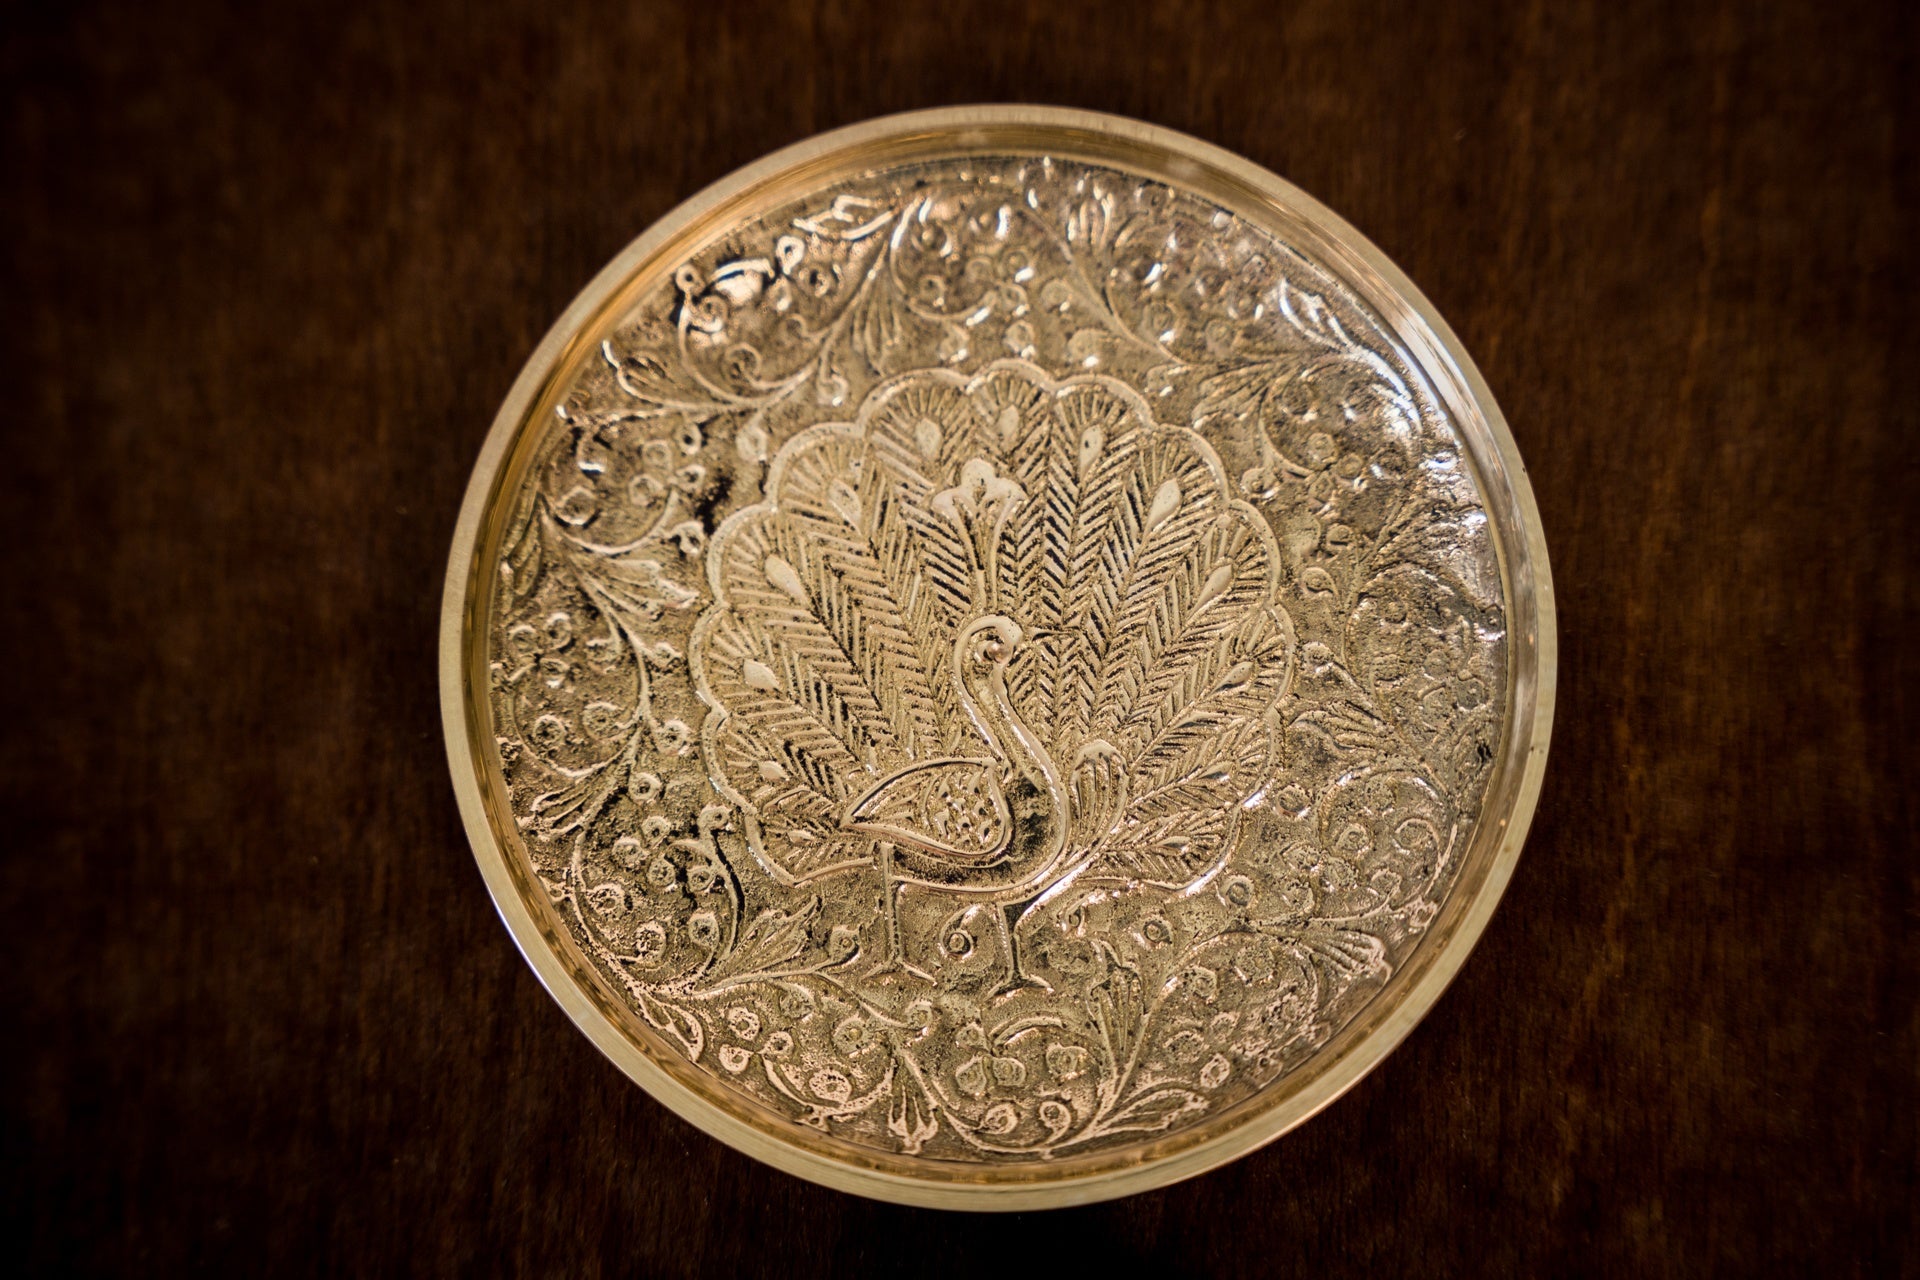 Puja plate, small sizes